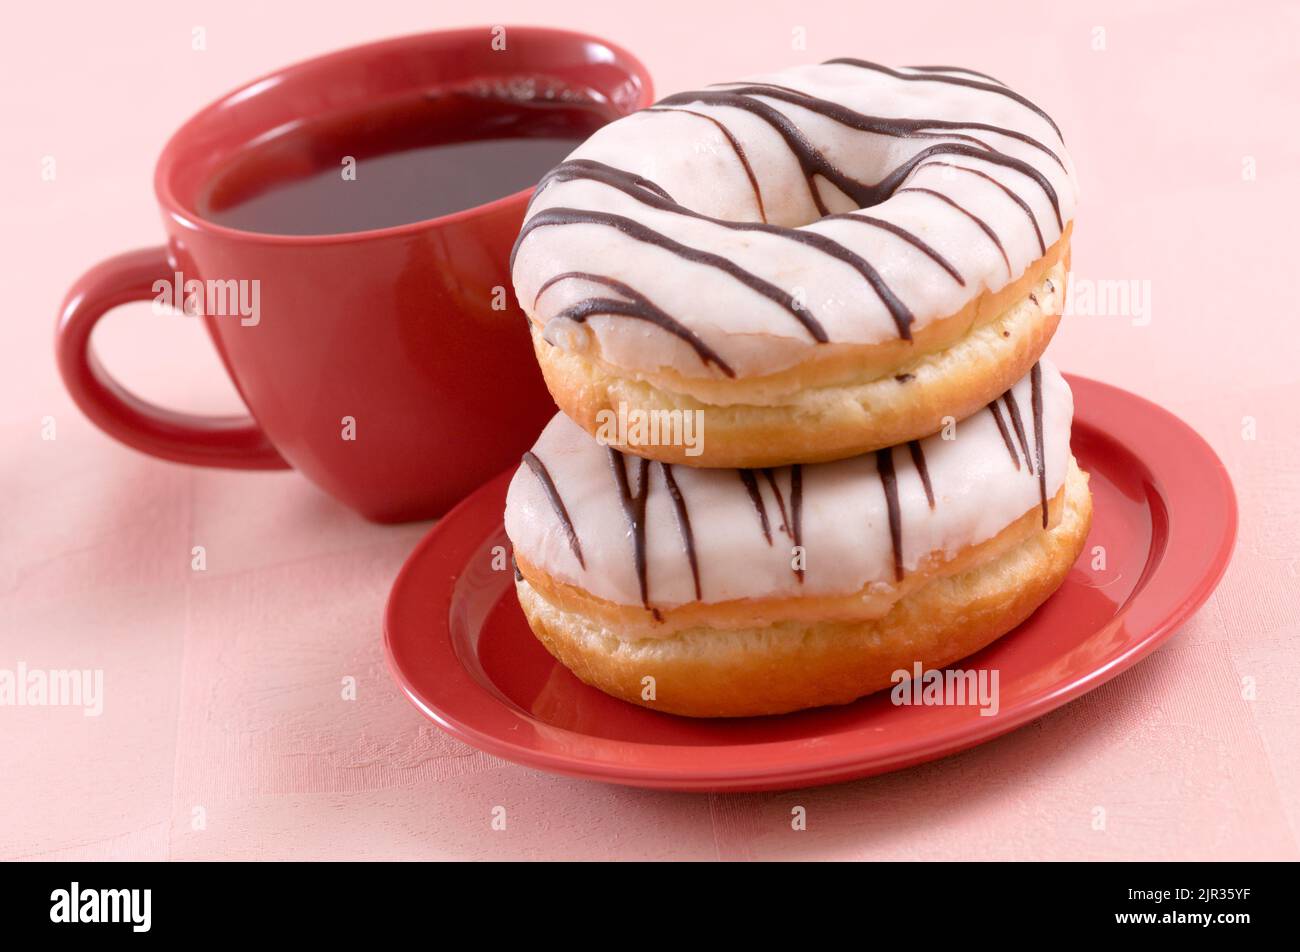 Glazed sweet doughnuts on red saucer and a cup of tea Stock Photo